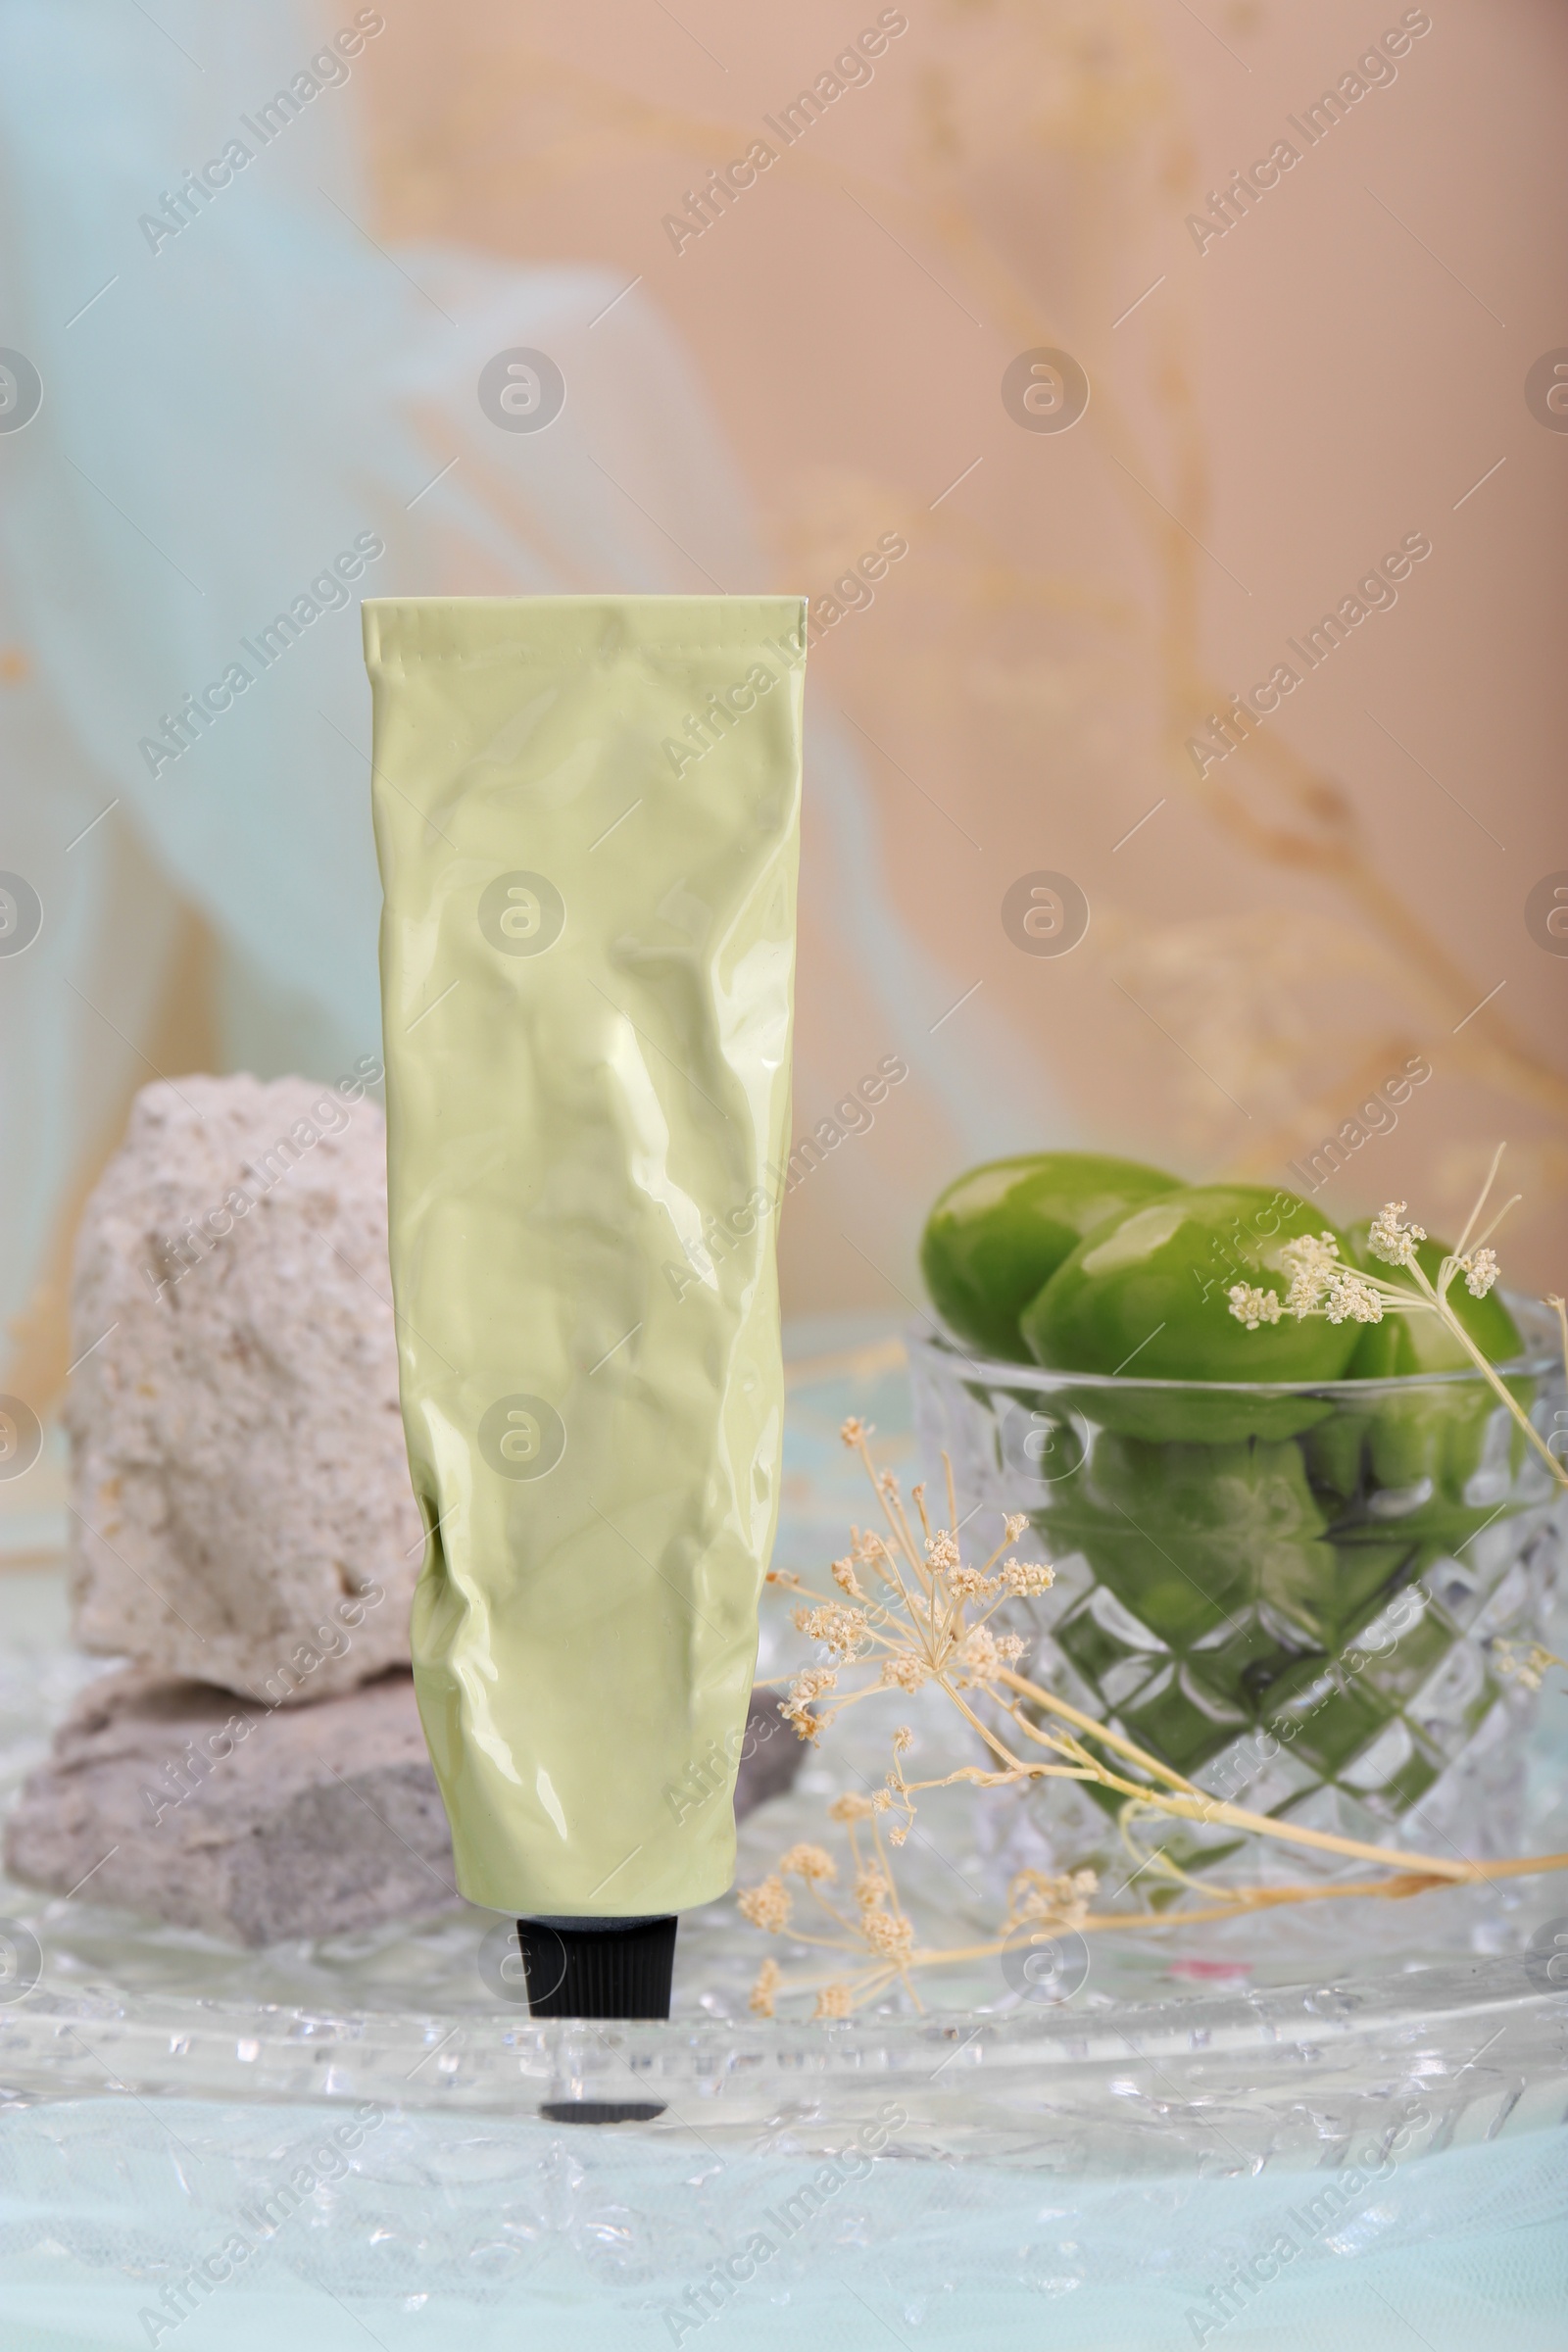 Photo of Tube of cream, olives and stones in glass tray